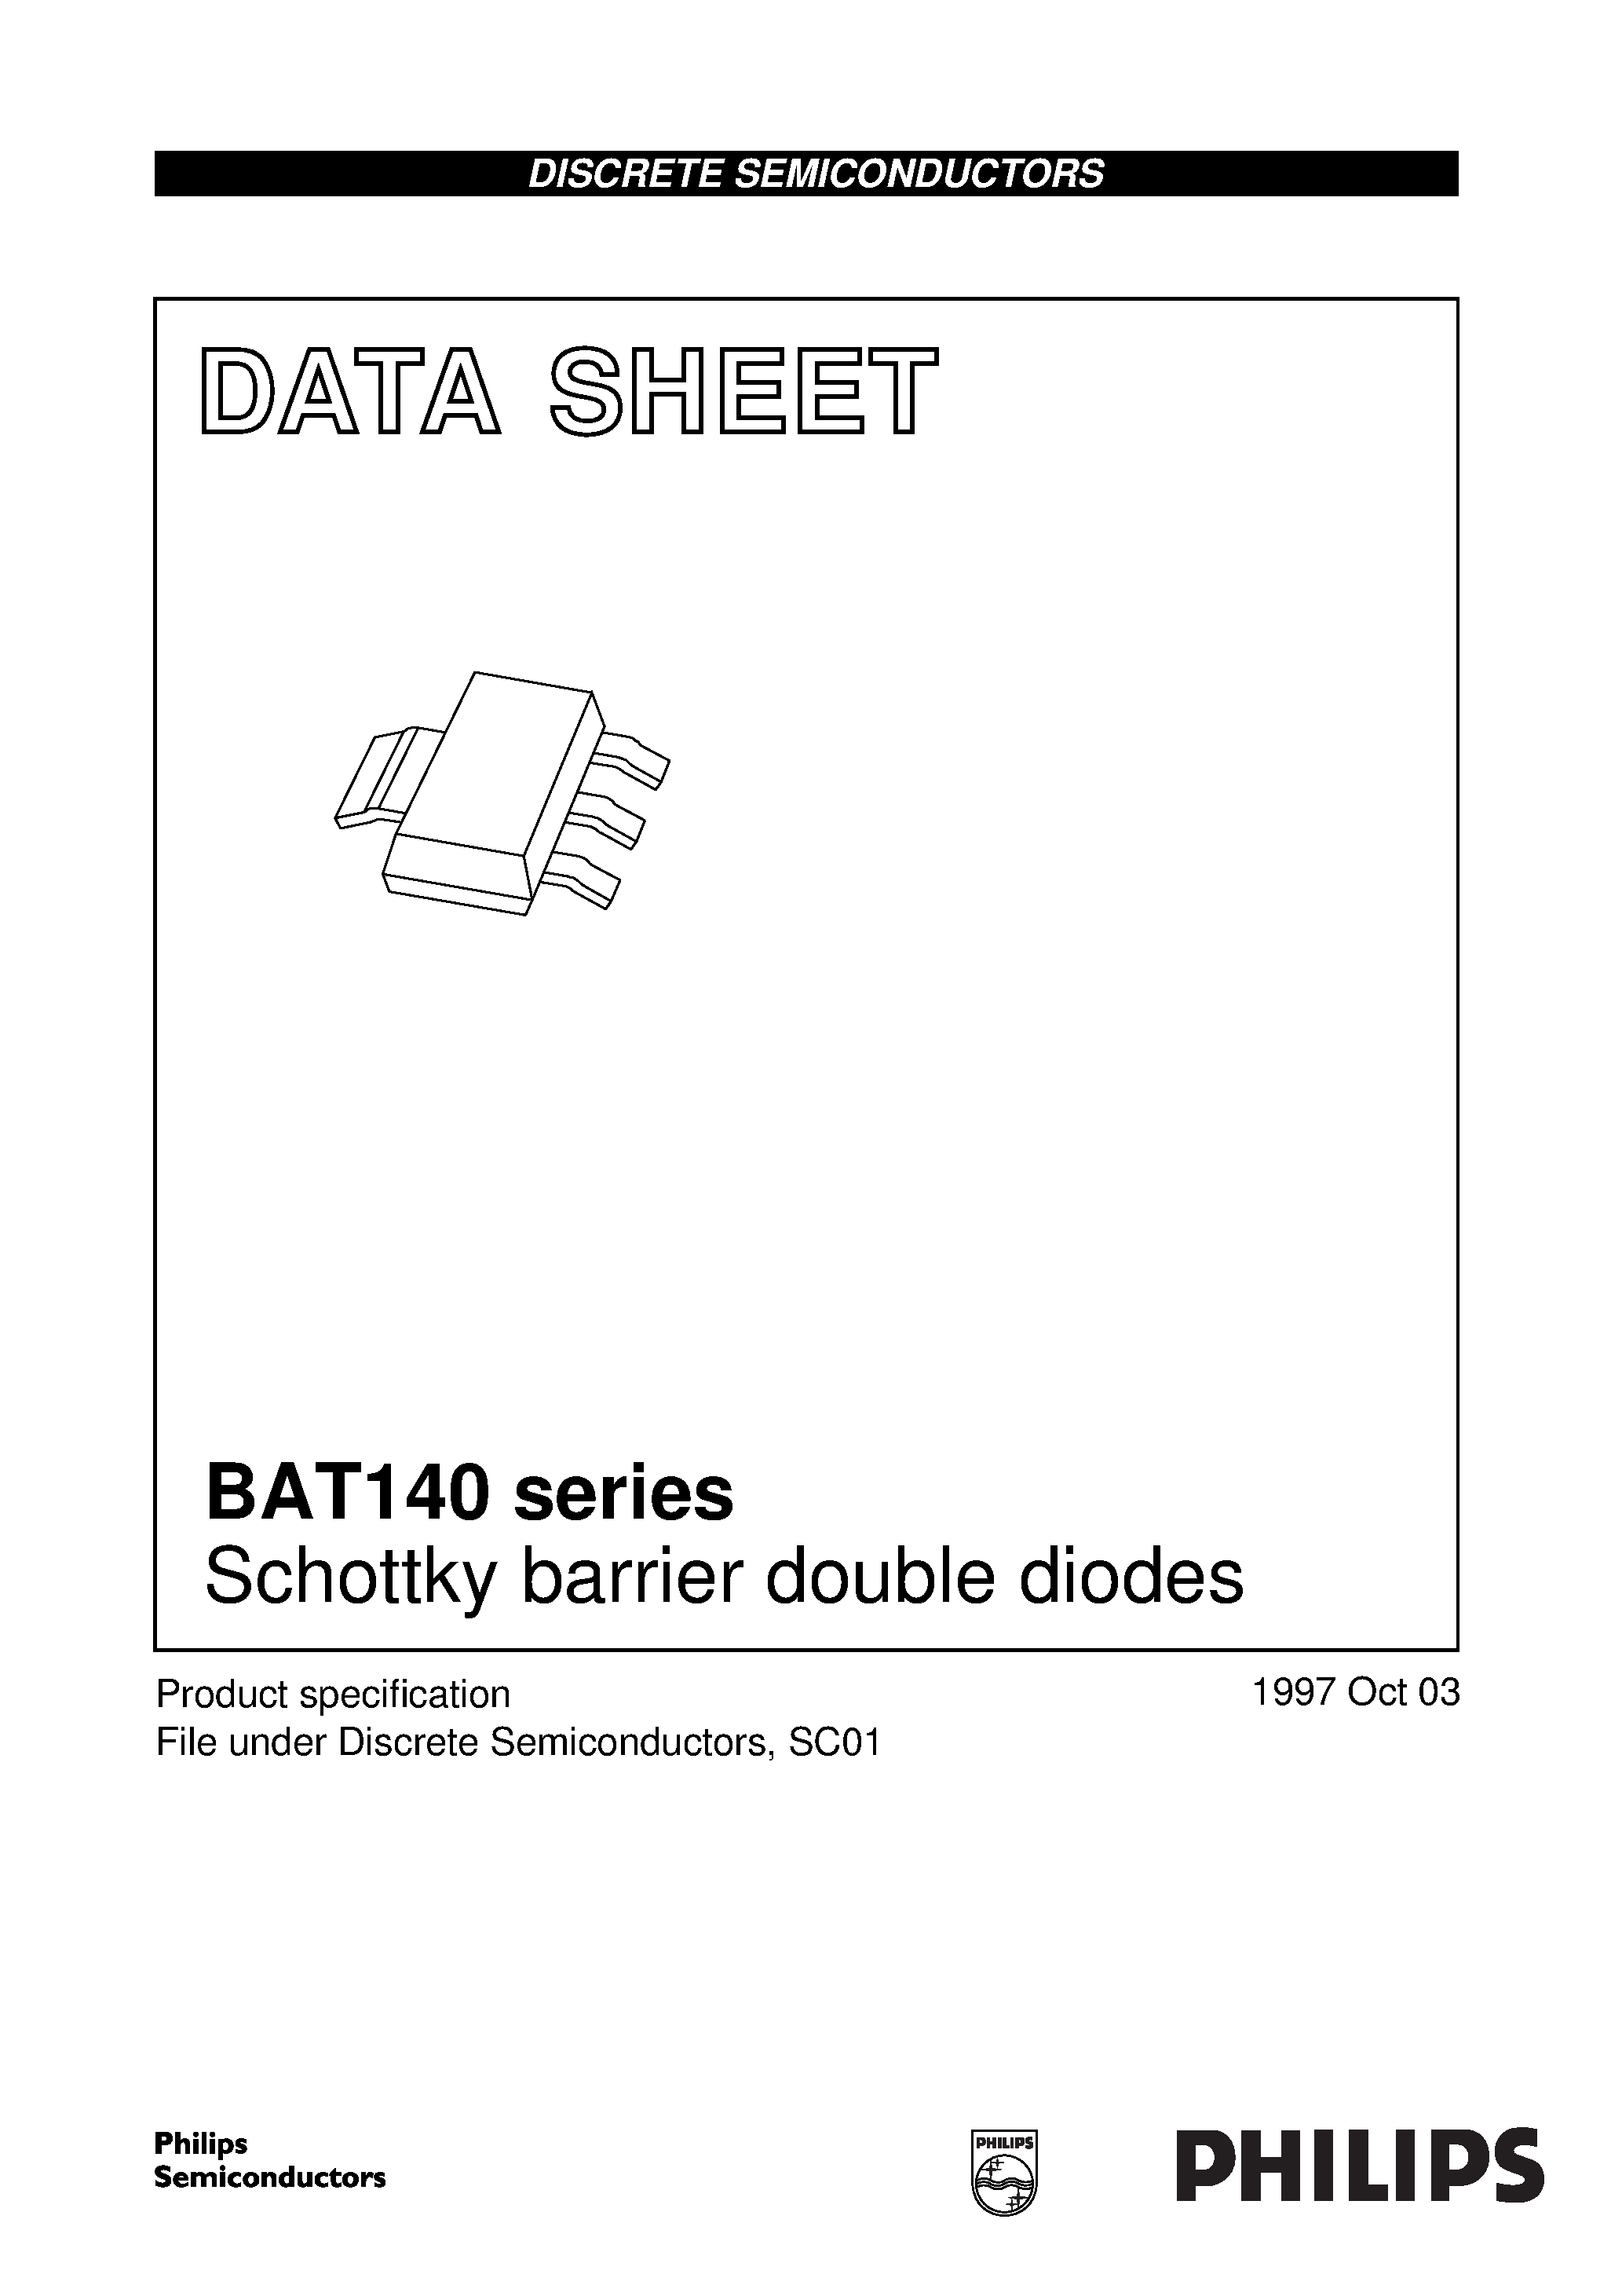 Даташит BAT140S - Schottky barrier double diodes страница 1